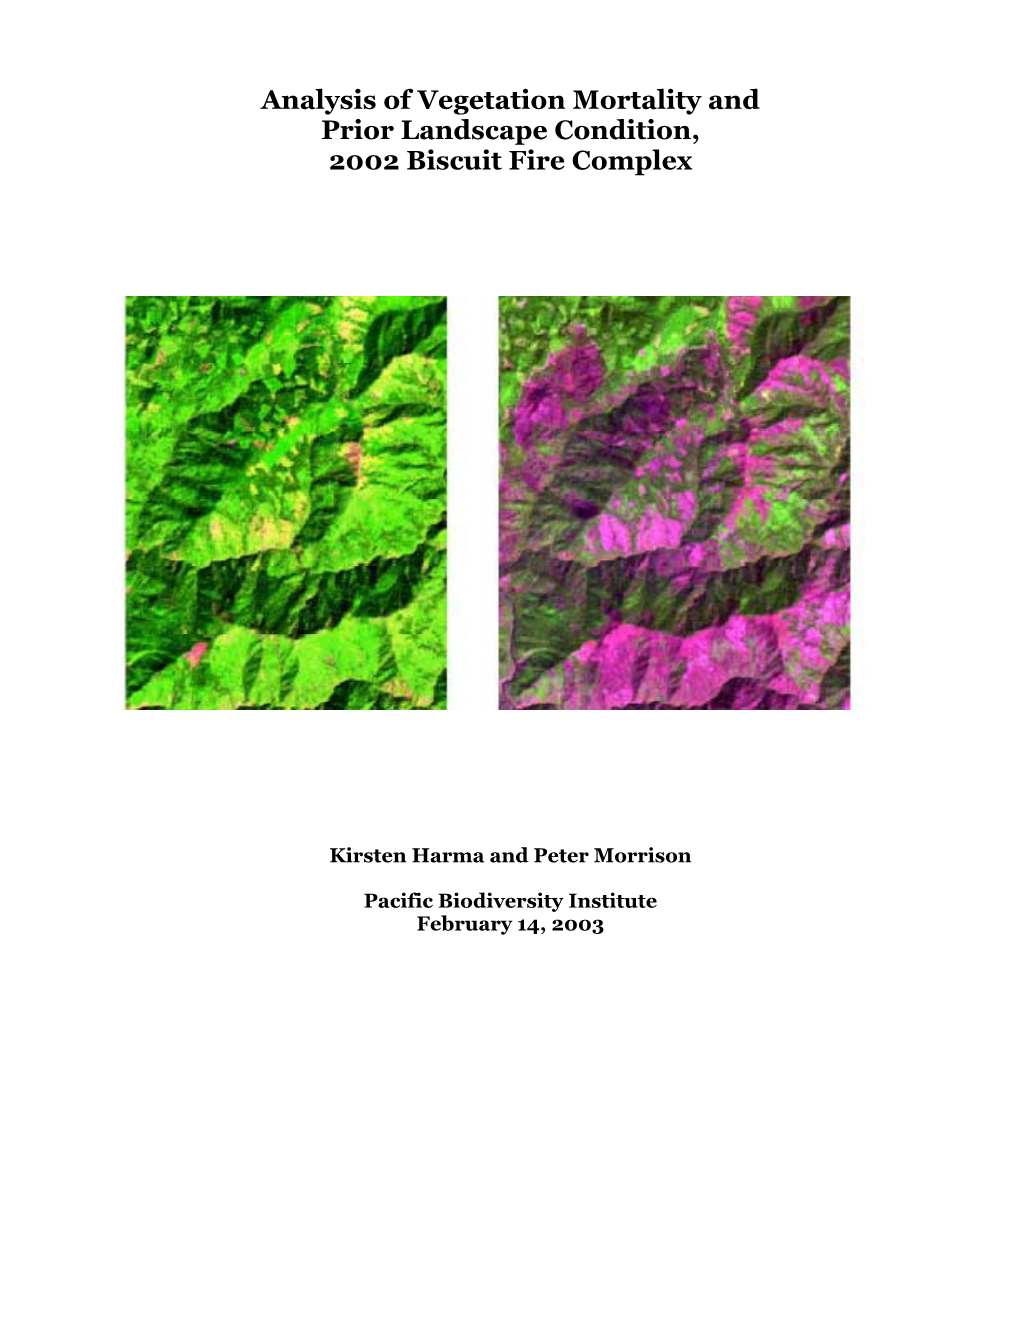 Assessment of the 2002 Biscuit Fire Complex in Southwest Oregon and the Landscape Condition of the Fire Area